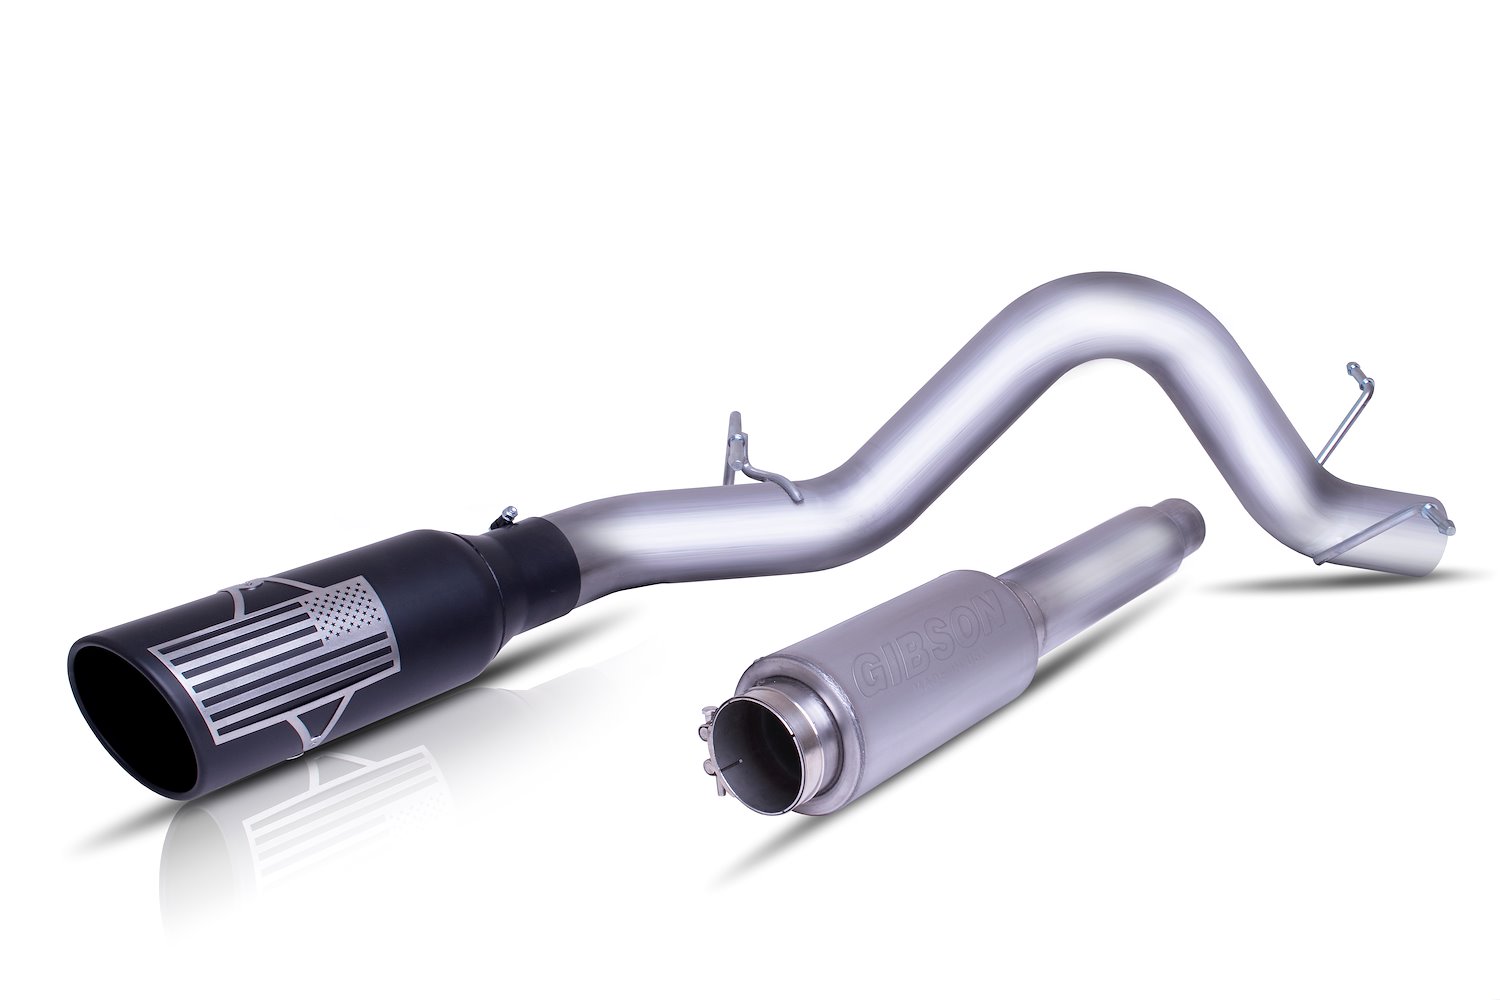 Patriot Series Cat-Back Exhaust System for 2007-Up Chevy Silverado/GMC Sierra Truck